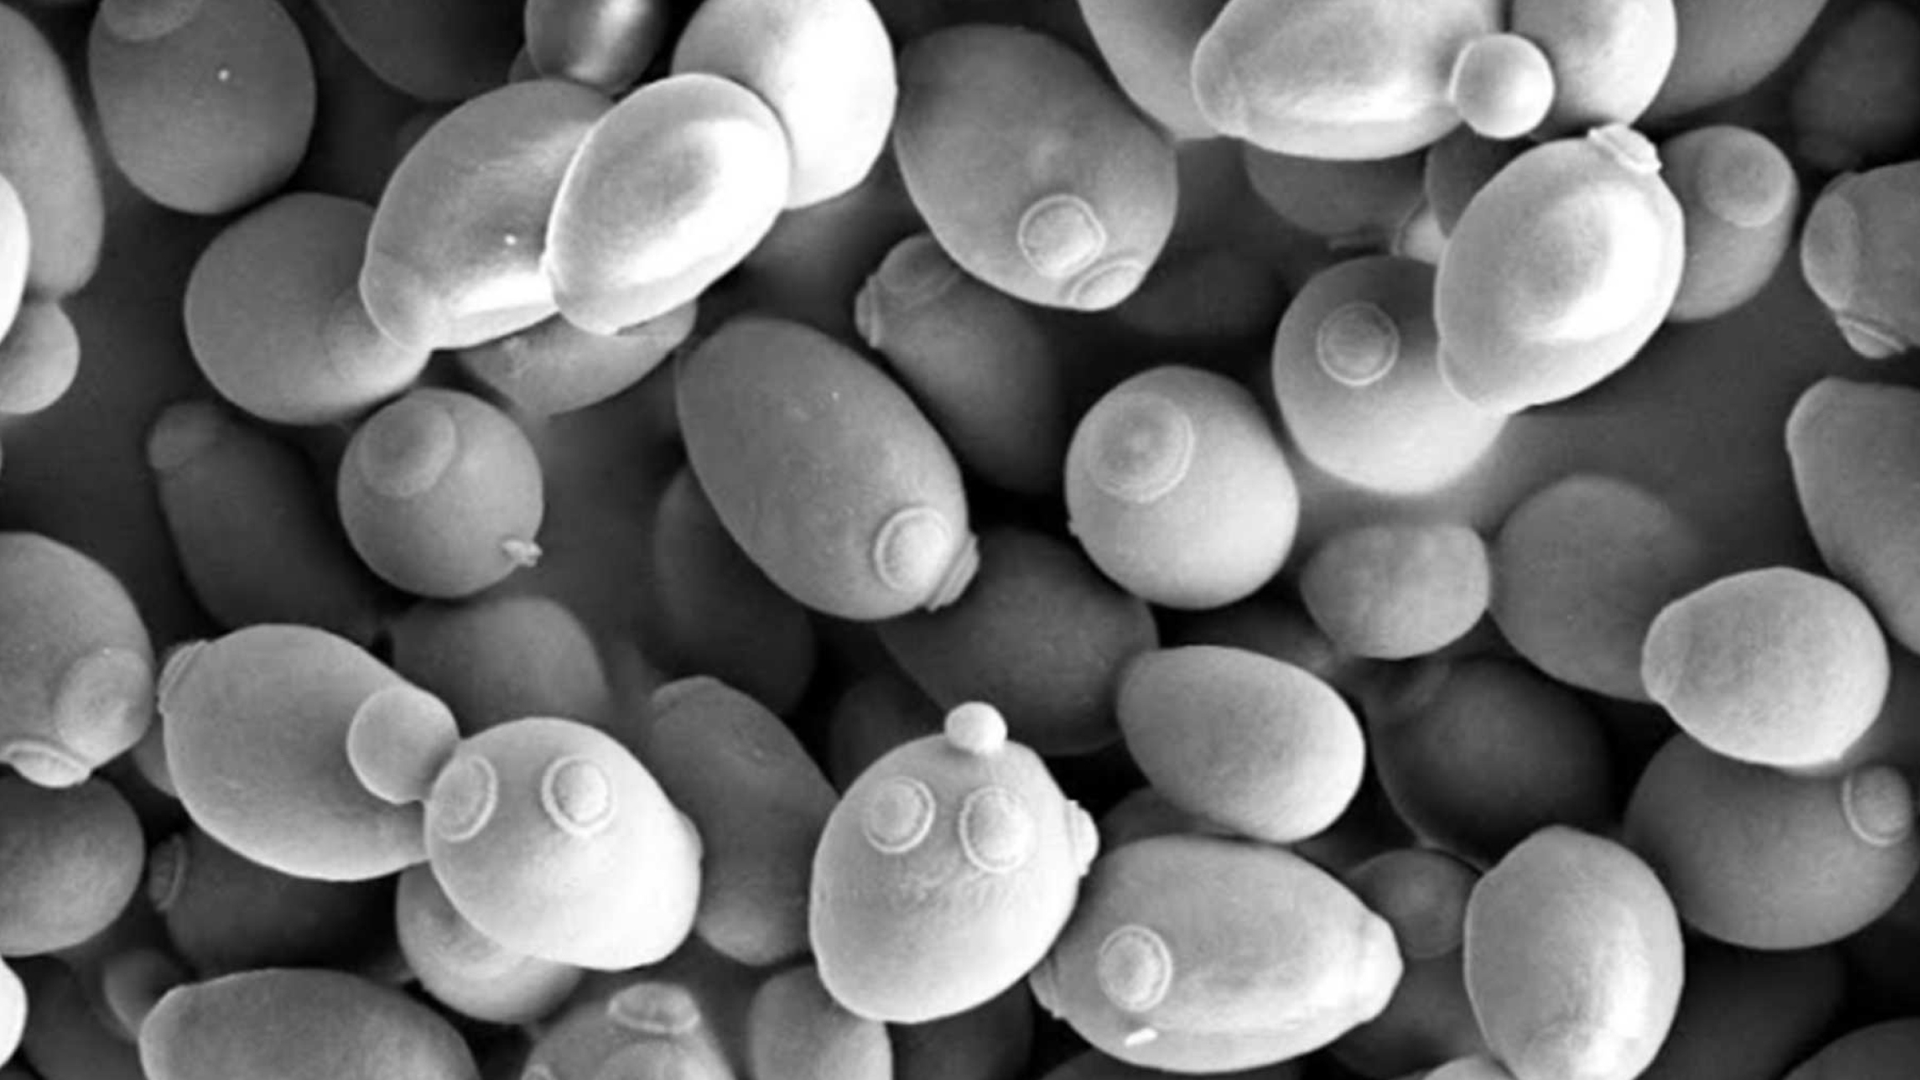 Electron micrograph of yeast cells